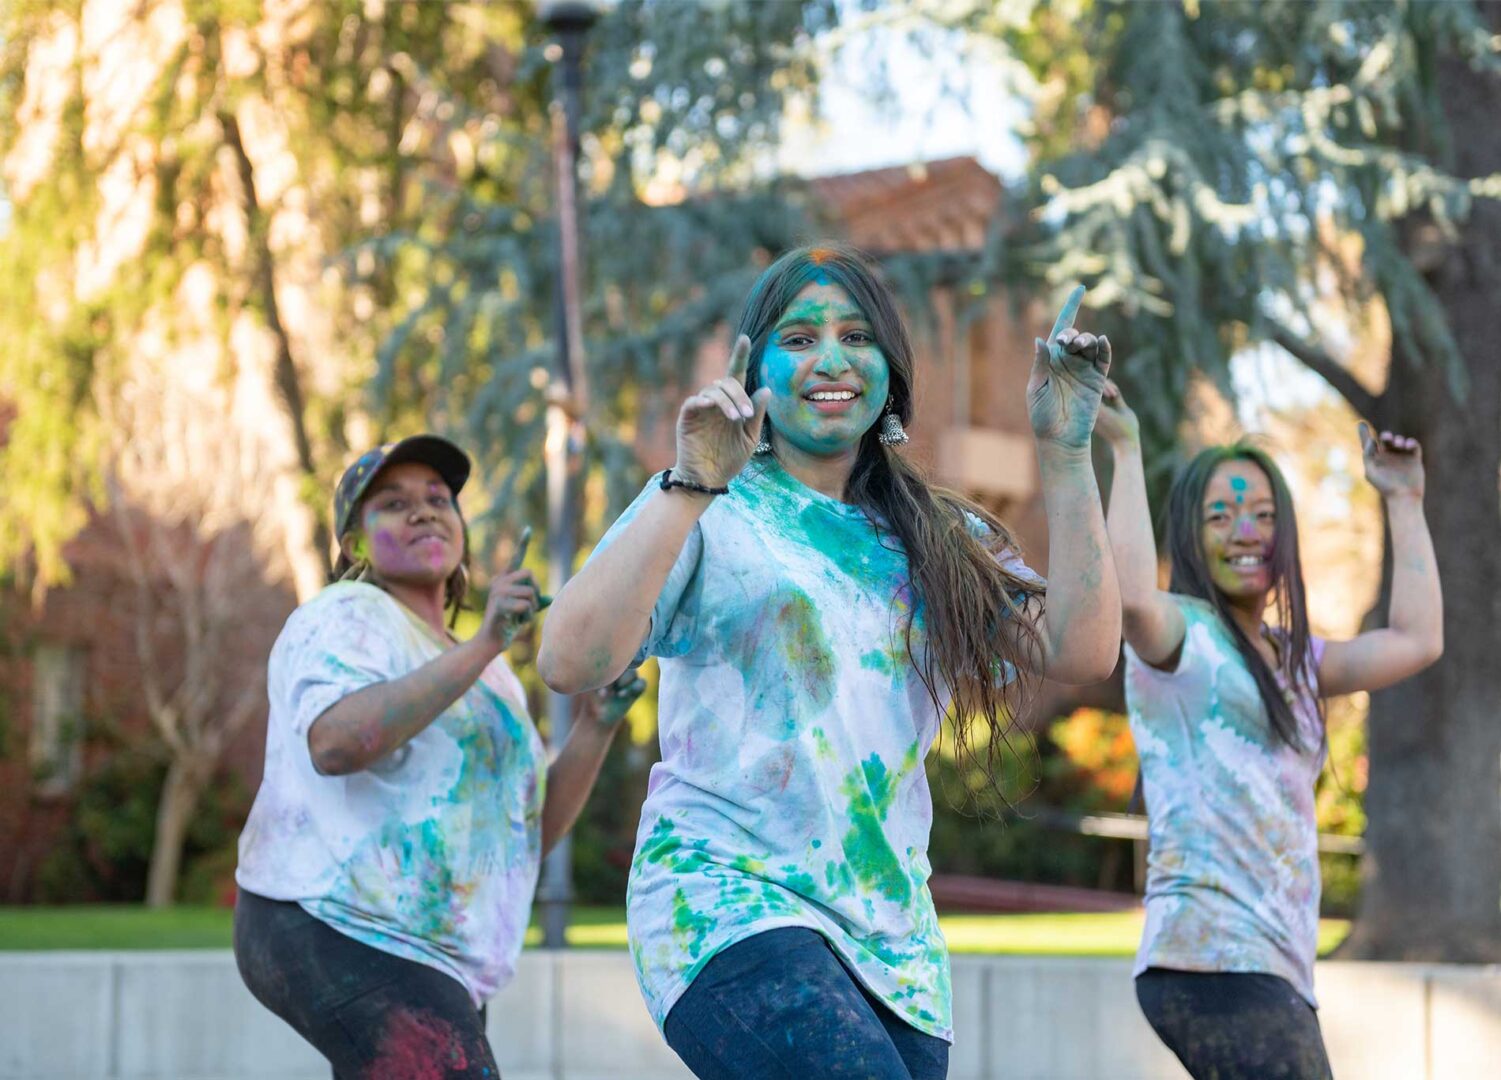 Covered in celebratory paint, Bollywood Dance Club founder,
Aishwarya Gowda, center, performs
with geology major Alinkar Nyein
(right) and public health major
Valinda Arnold (left) at Holi. The Hindu festival of colors,
love, and spring was hosted by the
Cross-Cultural Leadership Center and the Indian Students Association. 